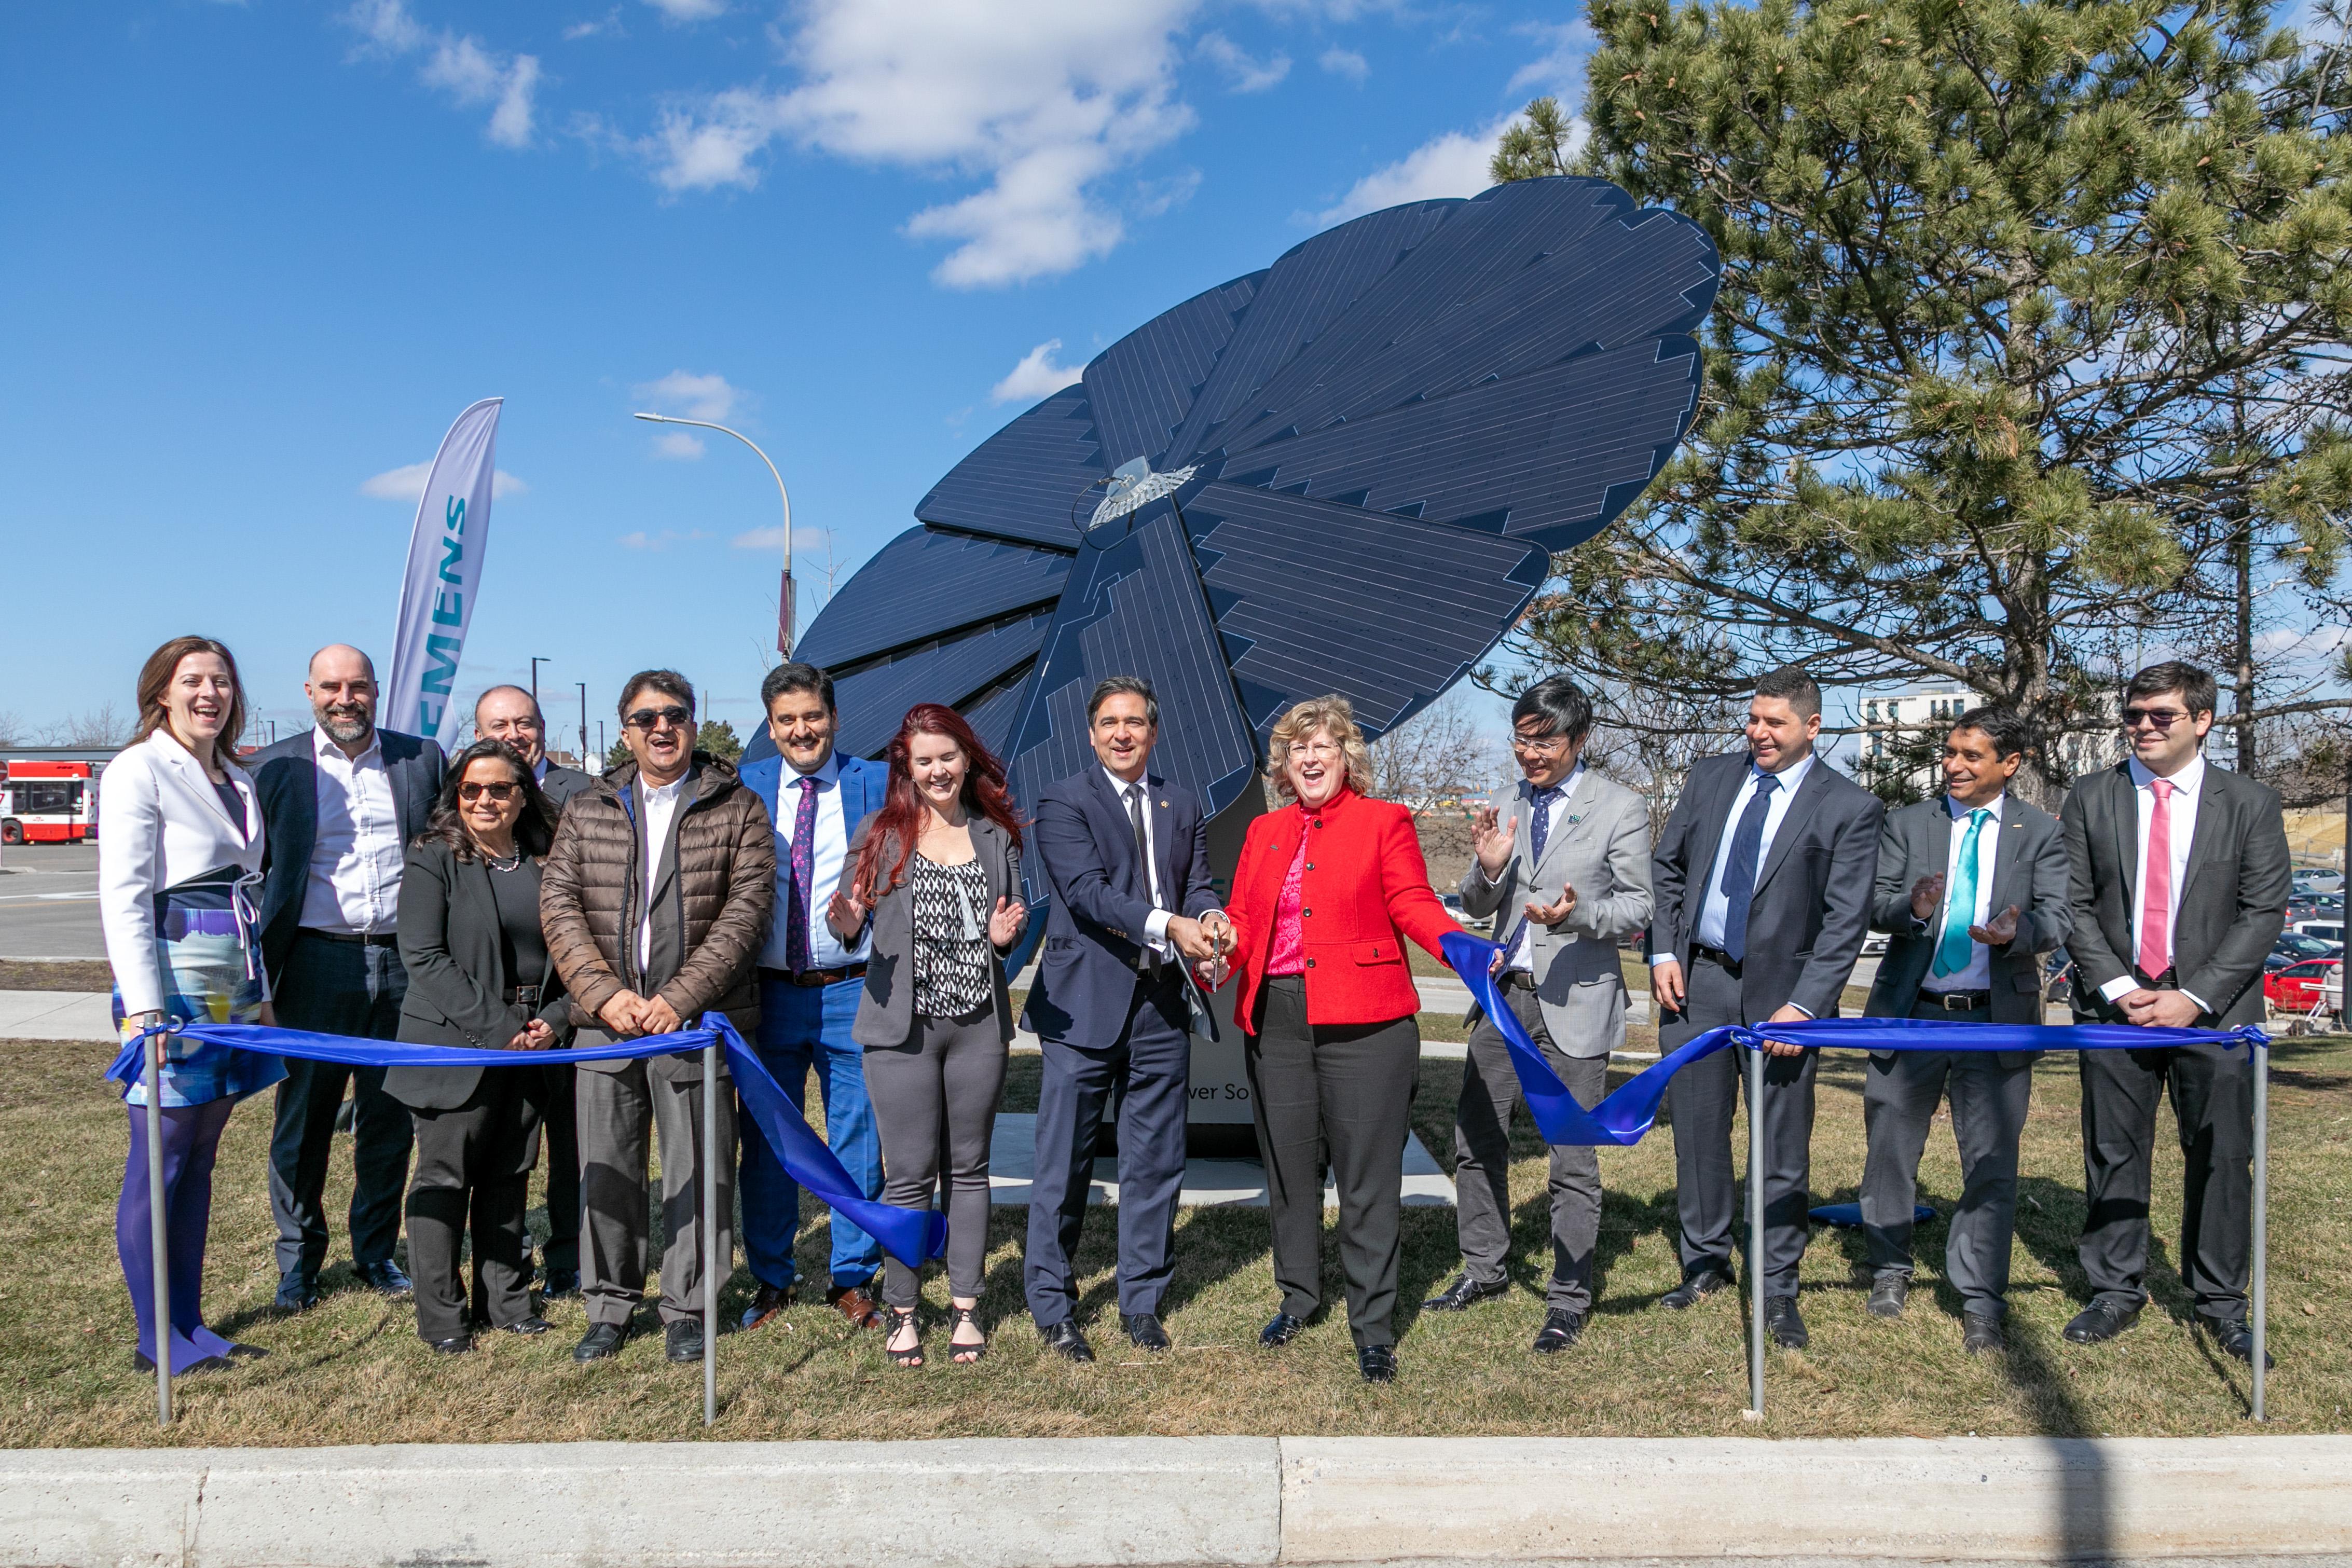 A group of people smile and clap as a ribbon is cut. The group is standing in front of a device equipped with solar panels shape